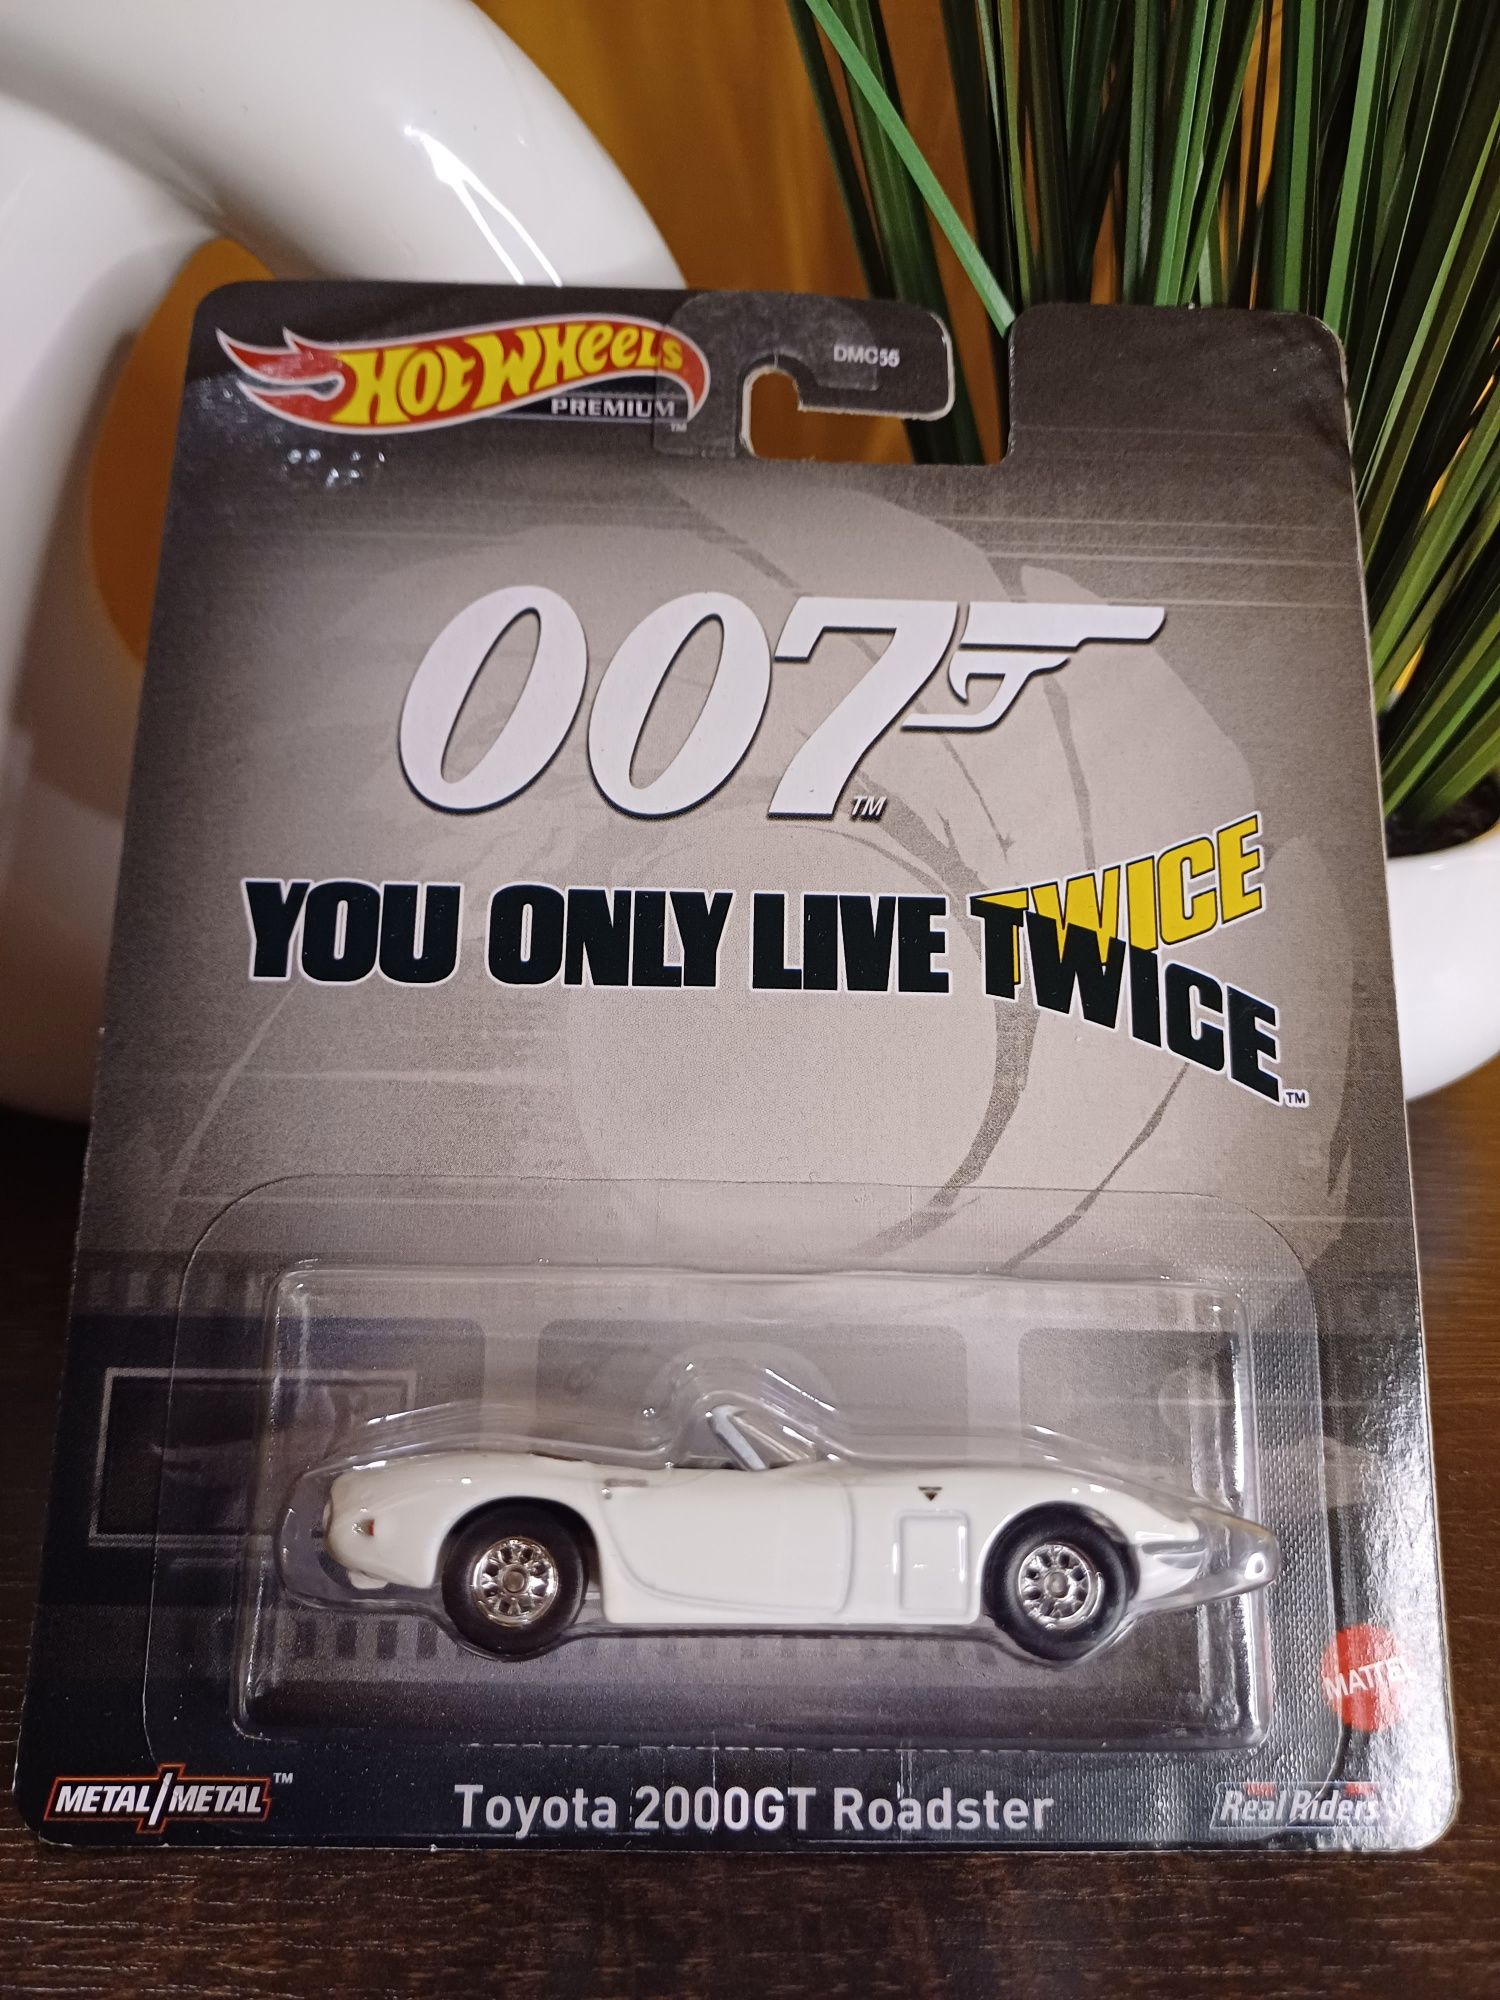 Hot Wheels Premium 007 You Only Live Twice, Toyota 2000GT Roadster